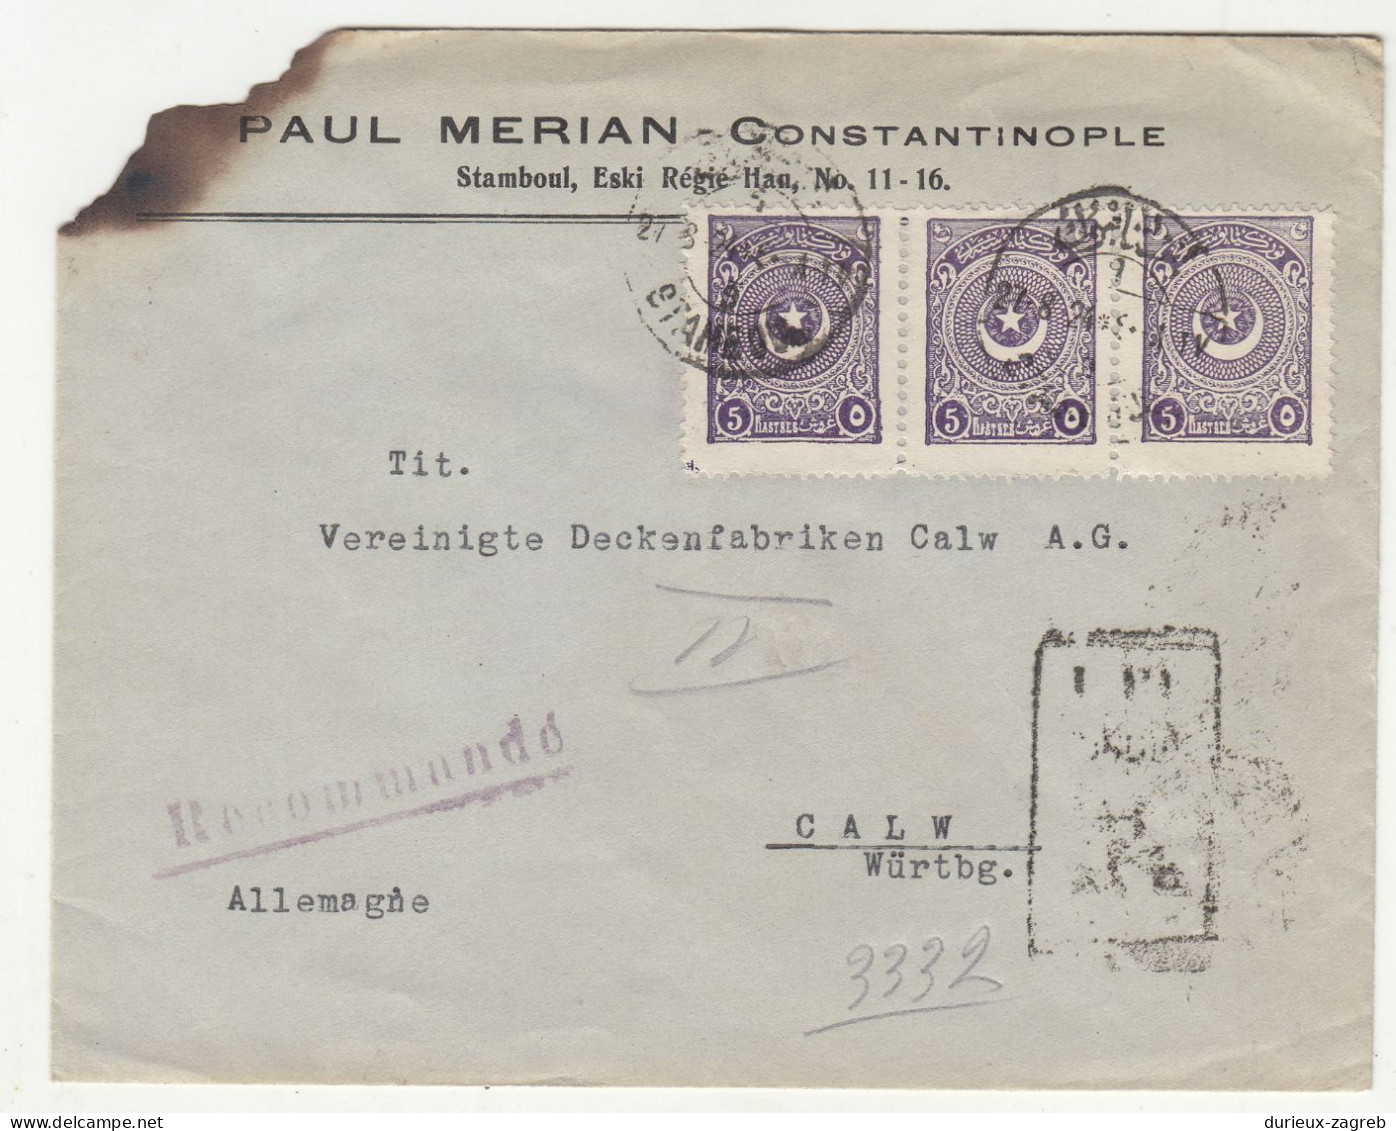 Paul Merian, Constantinople Company Letter Cover Posted Registered 1924 To Germany B230801 - Brieven En Documenten